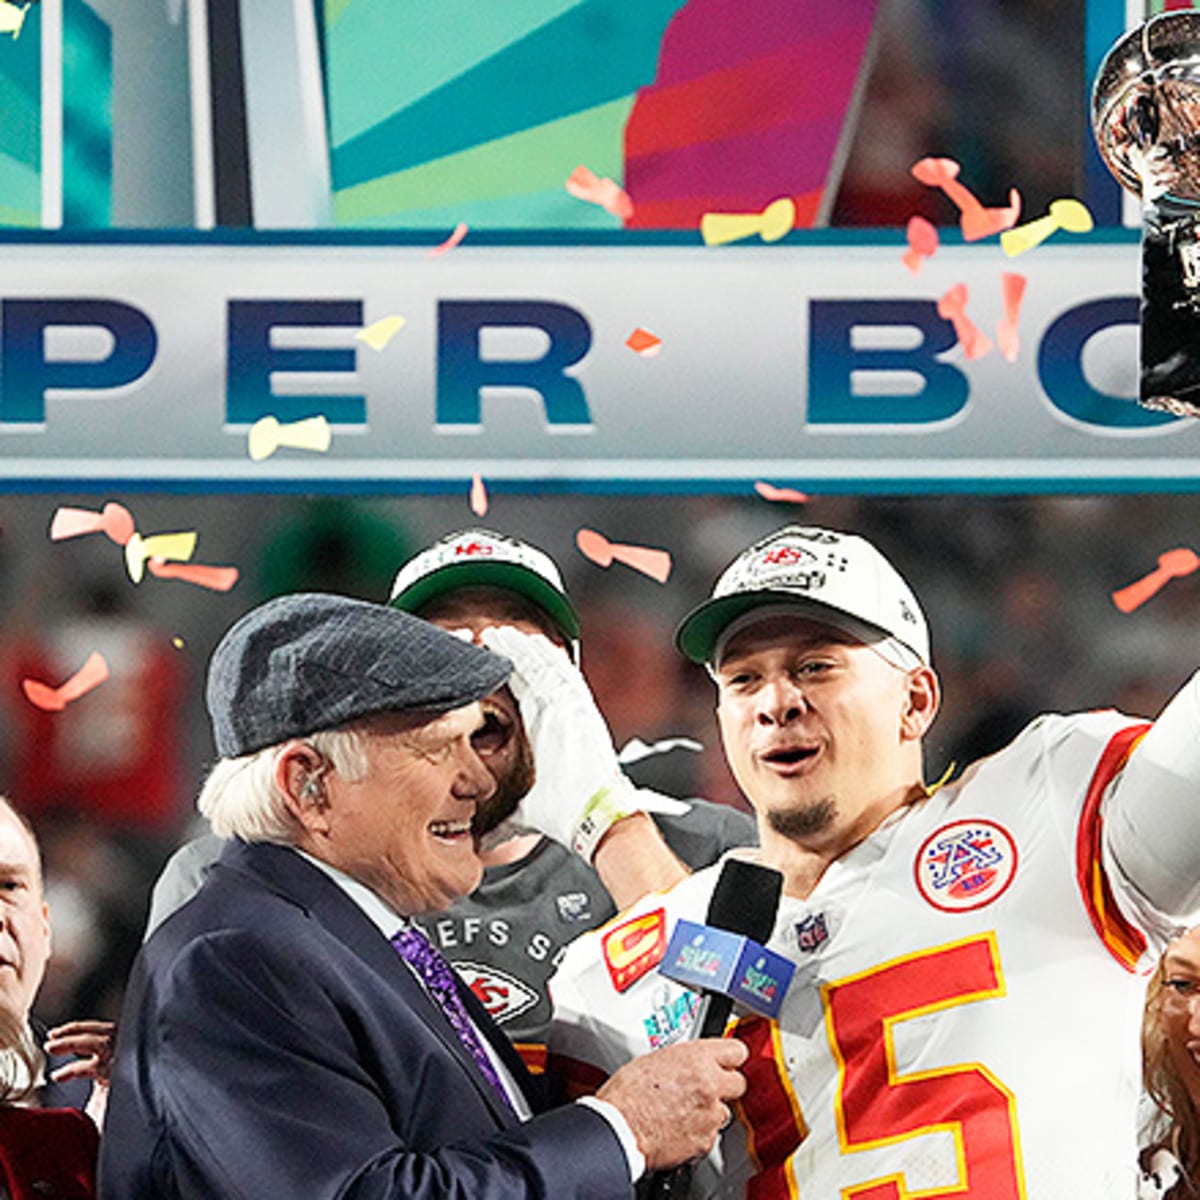 3 teams KC Chiefs have the best record against in NFL history